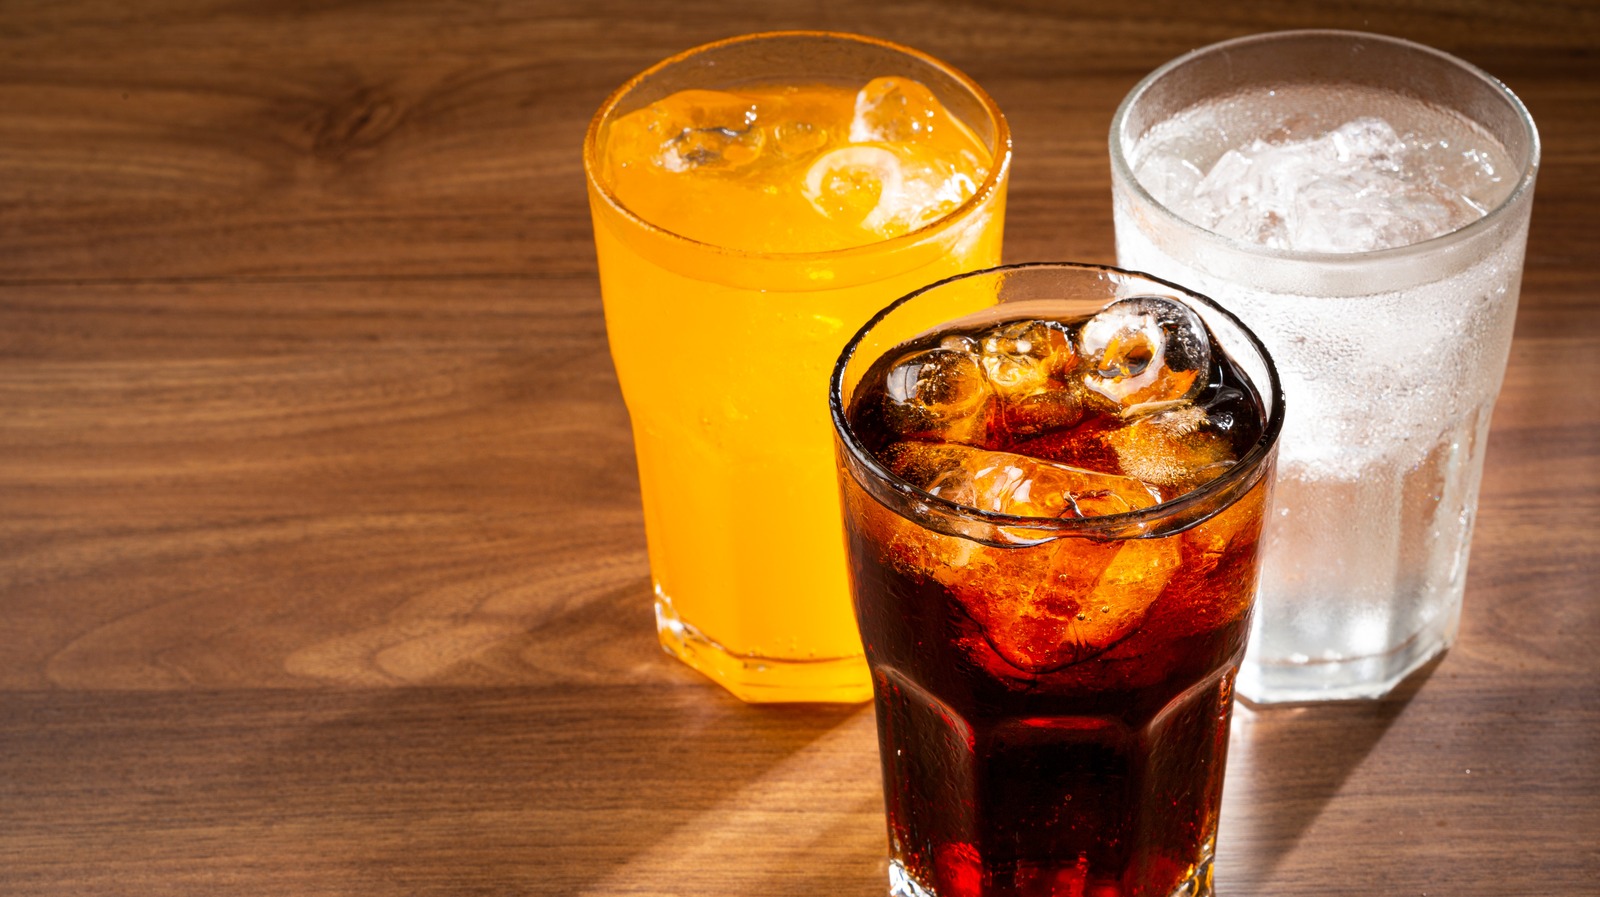 Big drink ban: Americans drink MORE soda when forced to buy smaller cups,  claim researchers